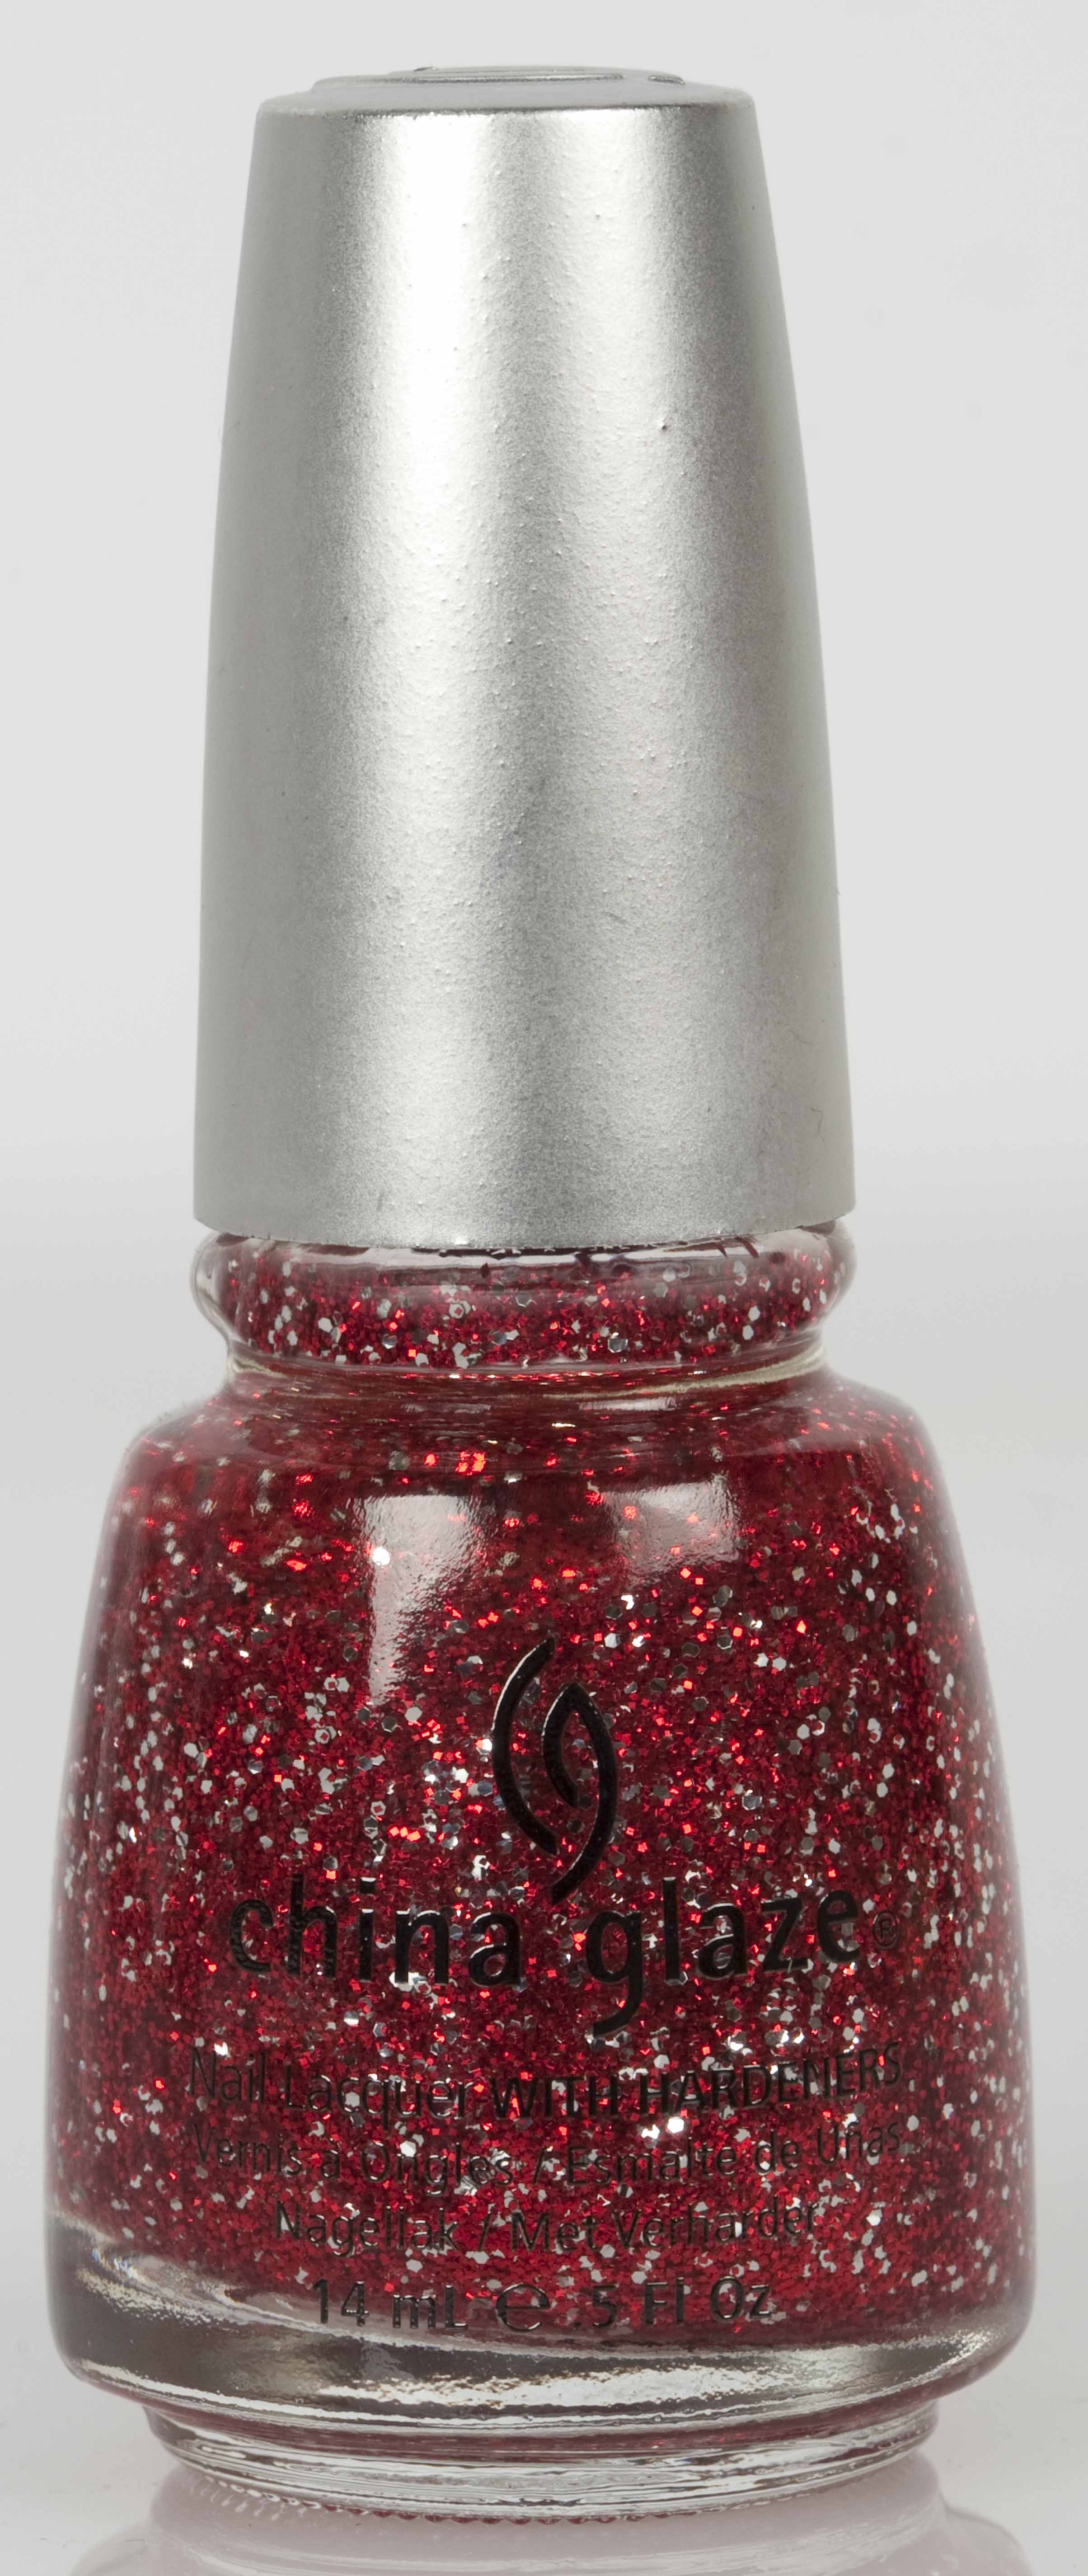 China Glaze Releases Eye Candy 3-D Glitters for Winter 2011